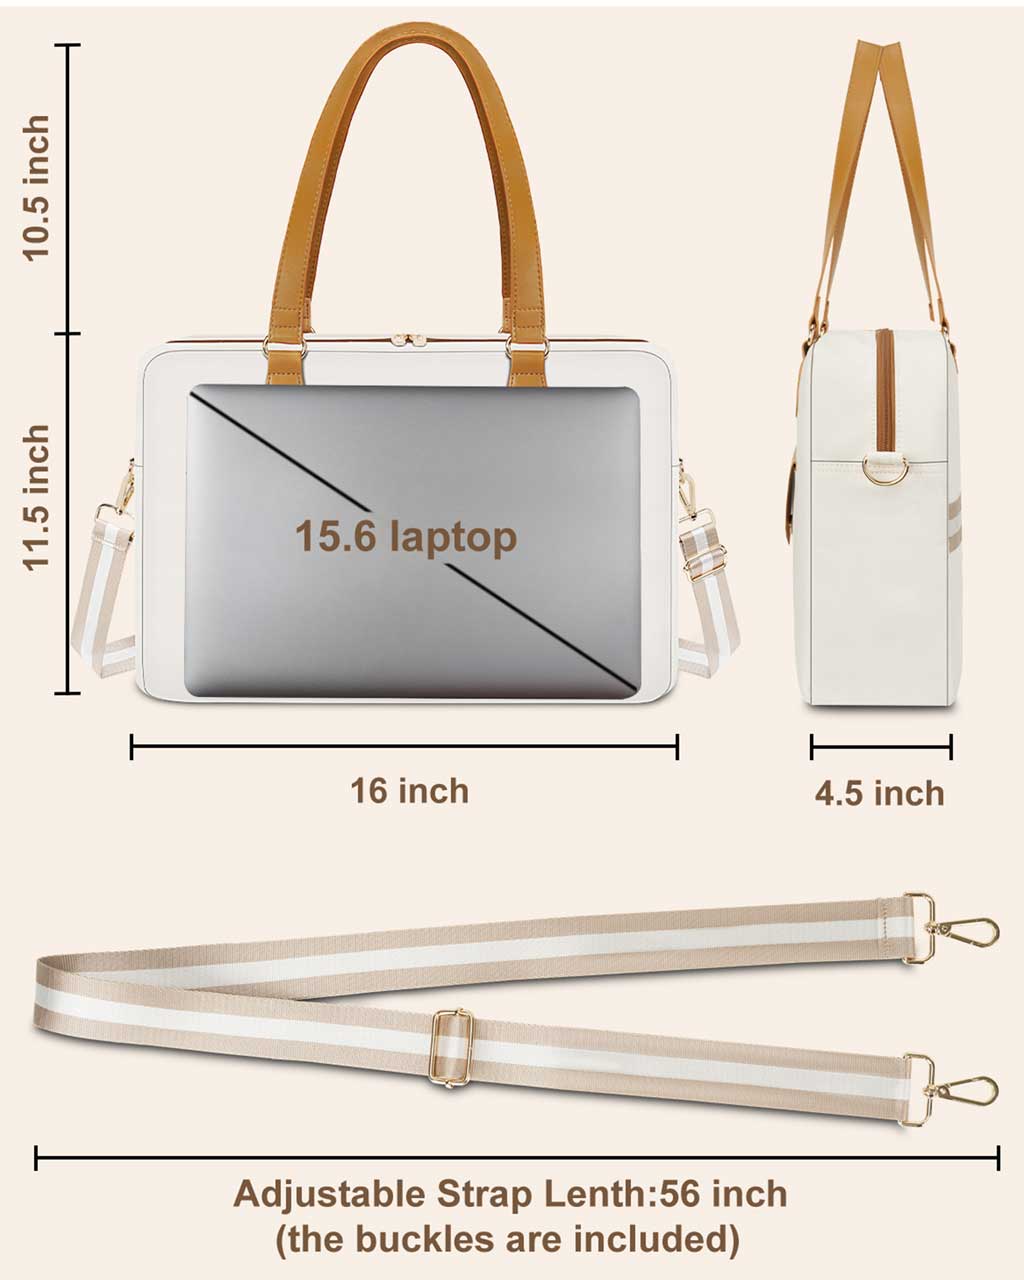 15.6 inch Laptop bags for women Briefcases Luxury handbags women bags  designer PU Leather Computer bag brief case Document bag